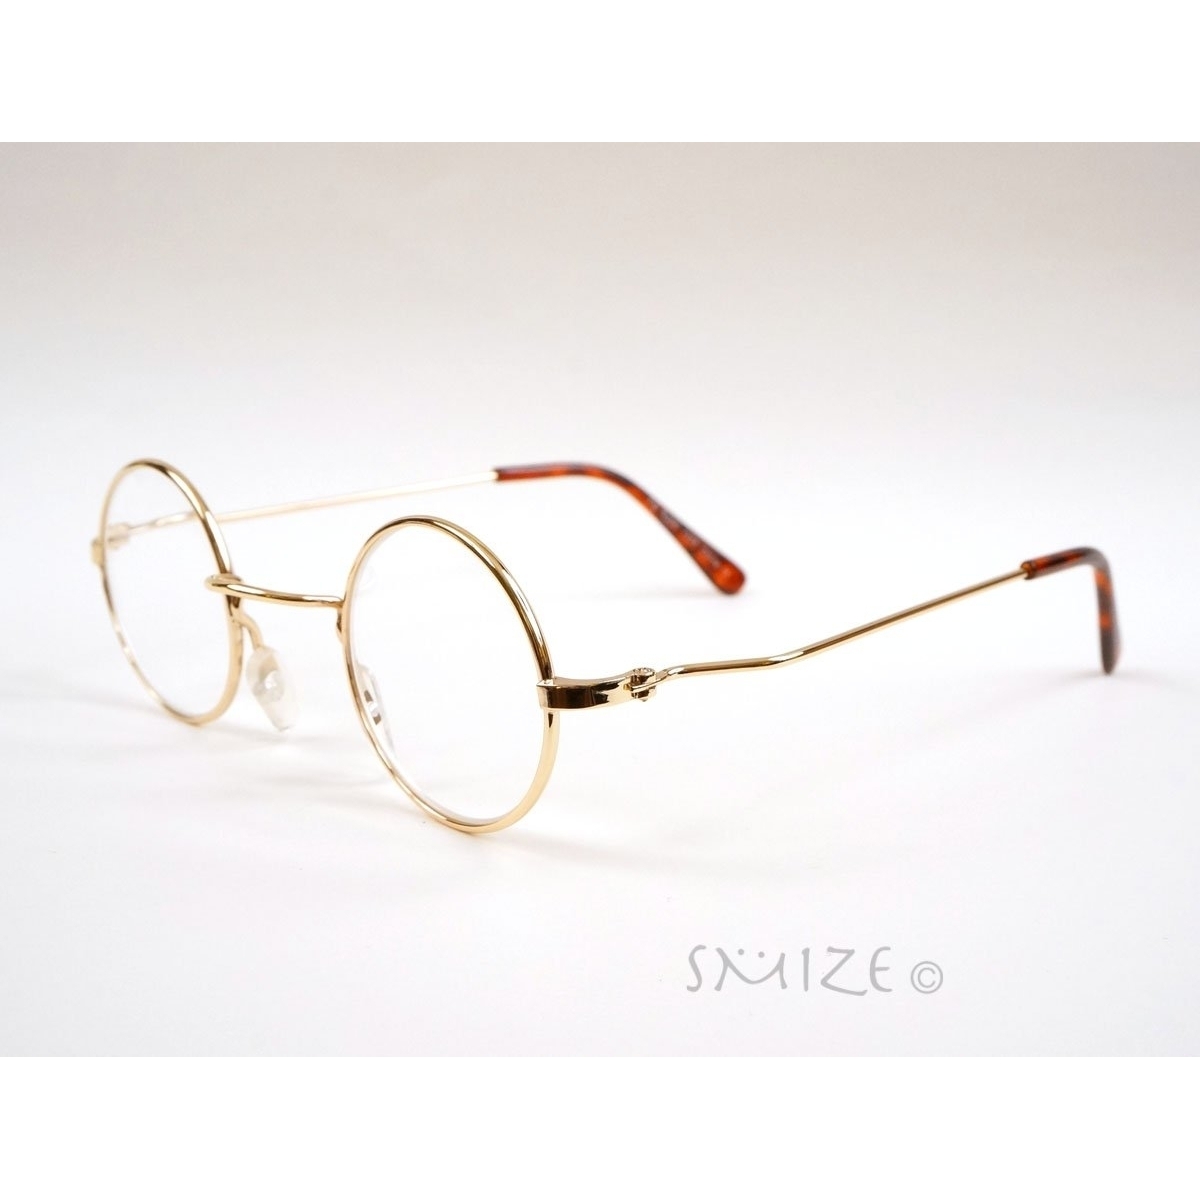 Lennon Style Round Metal Reading Glasses Black Gold Small Size Readers - Black, +3.75